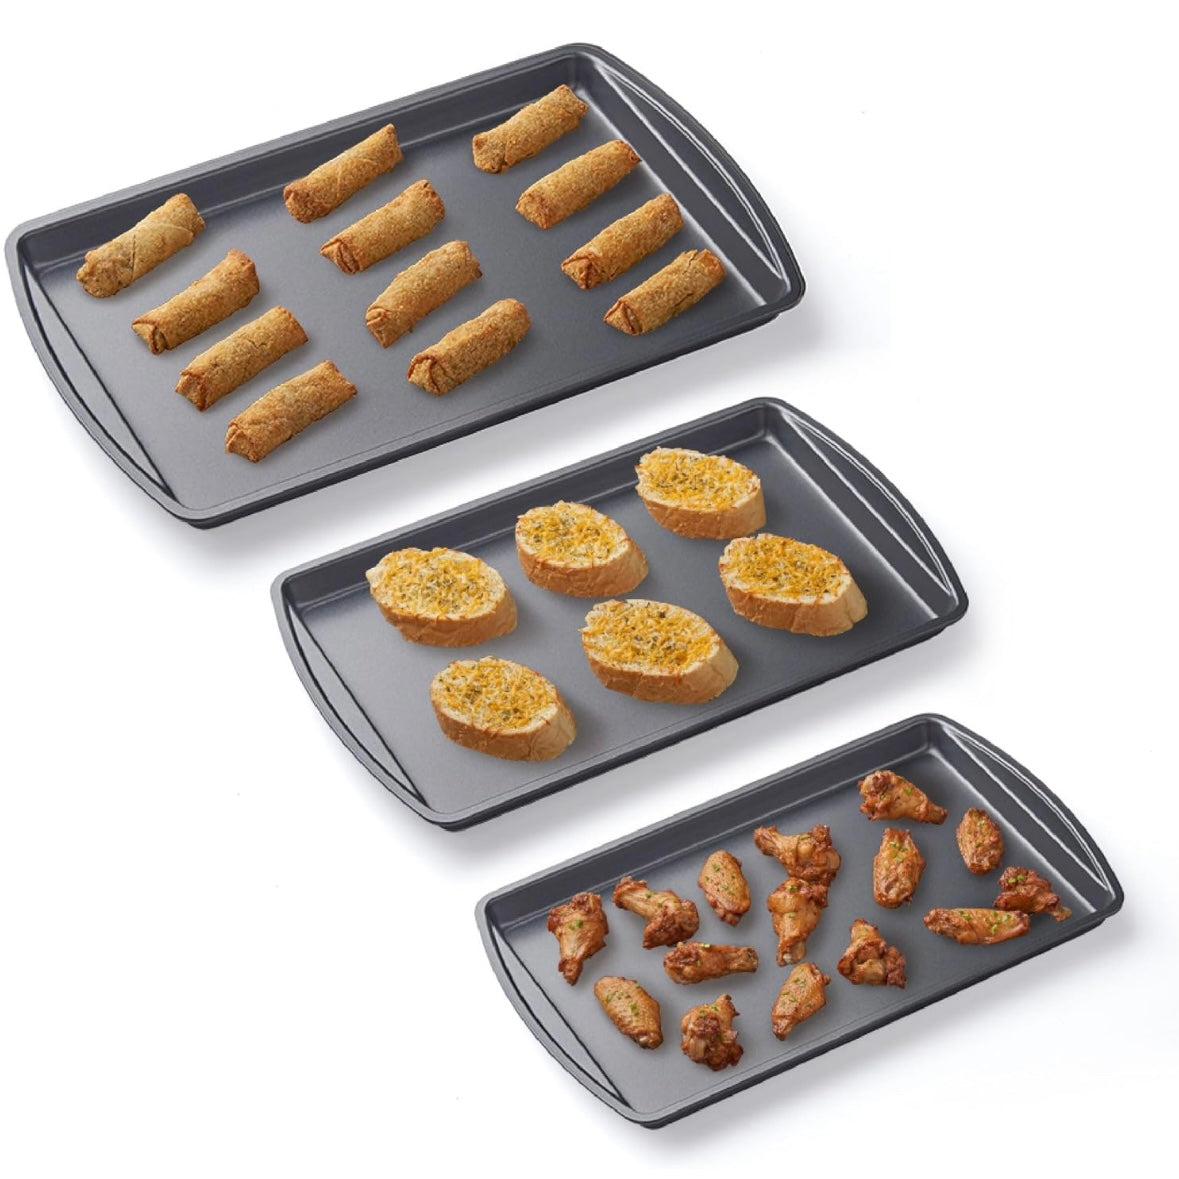 Set of 3 Nifty Cookie & Baking Sheets– Non-Stick Coated Steel, Dishwasher Oven Safe